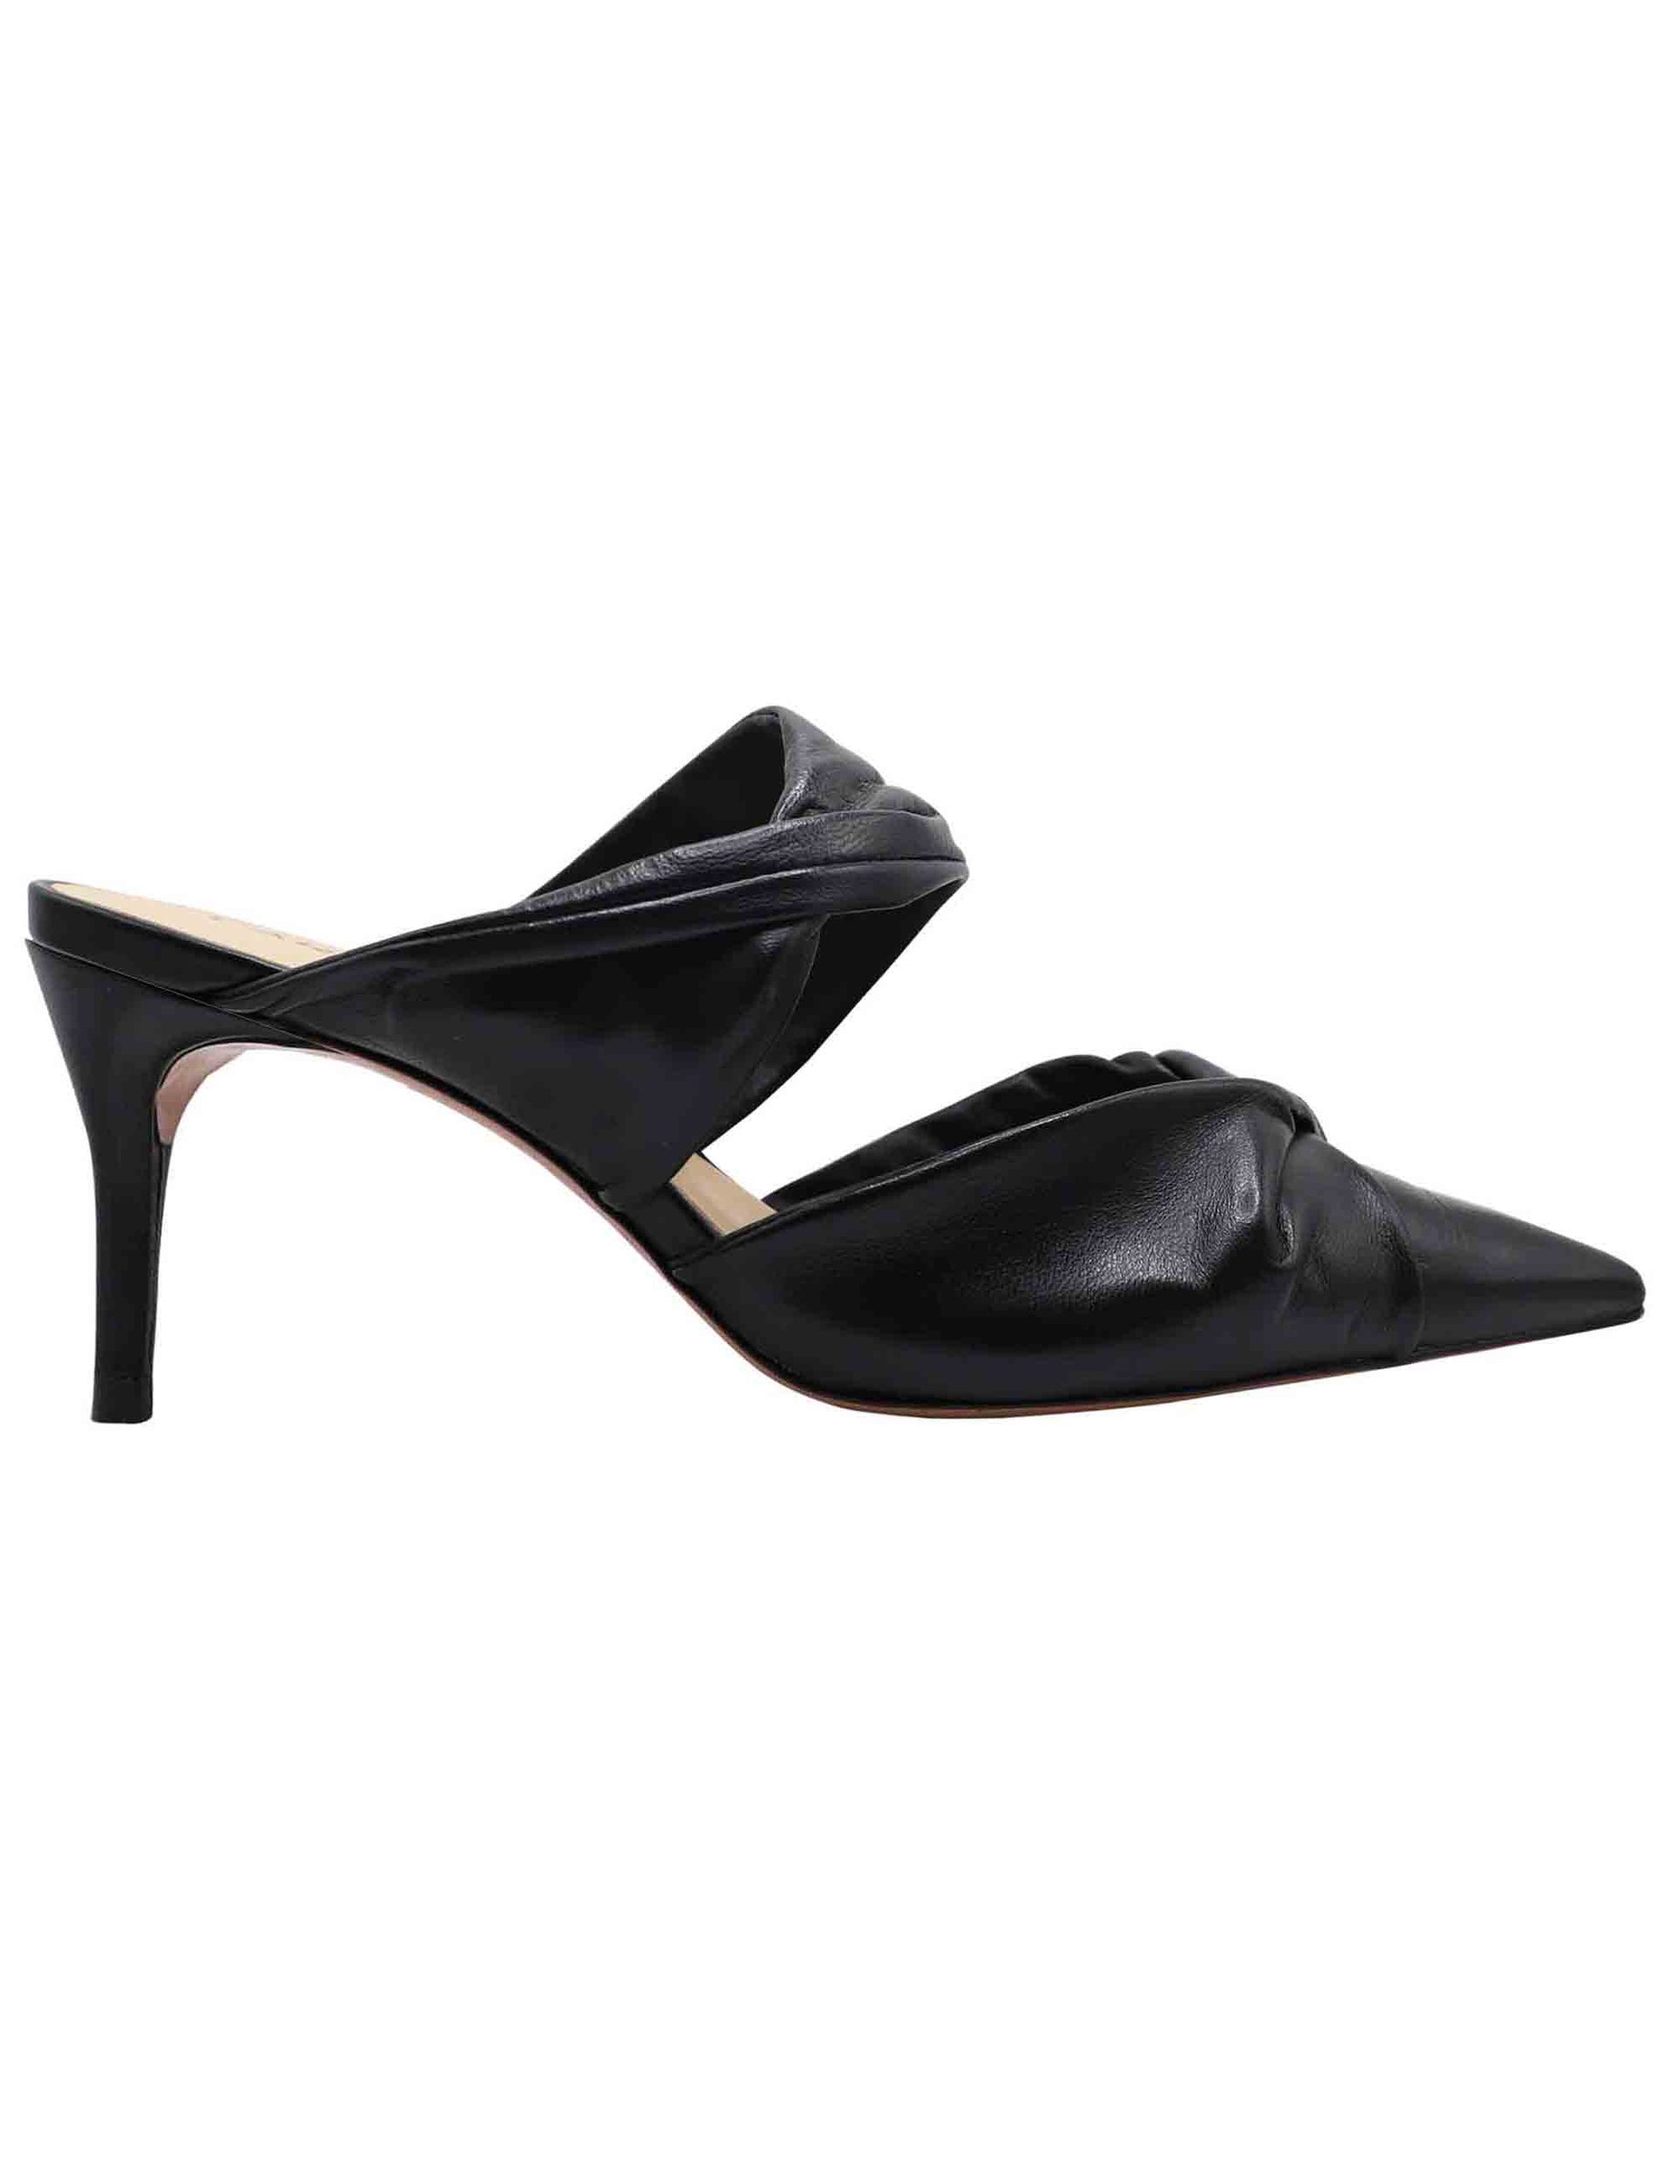 Women's black leather sabot with band on the instep and pointed toe